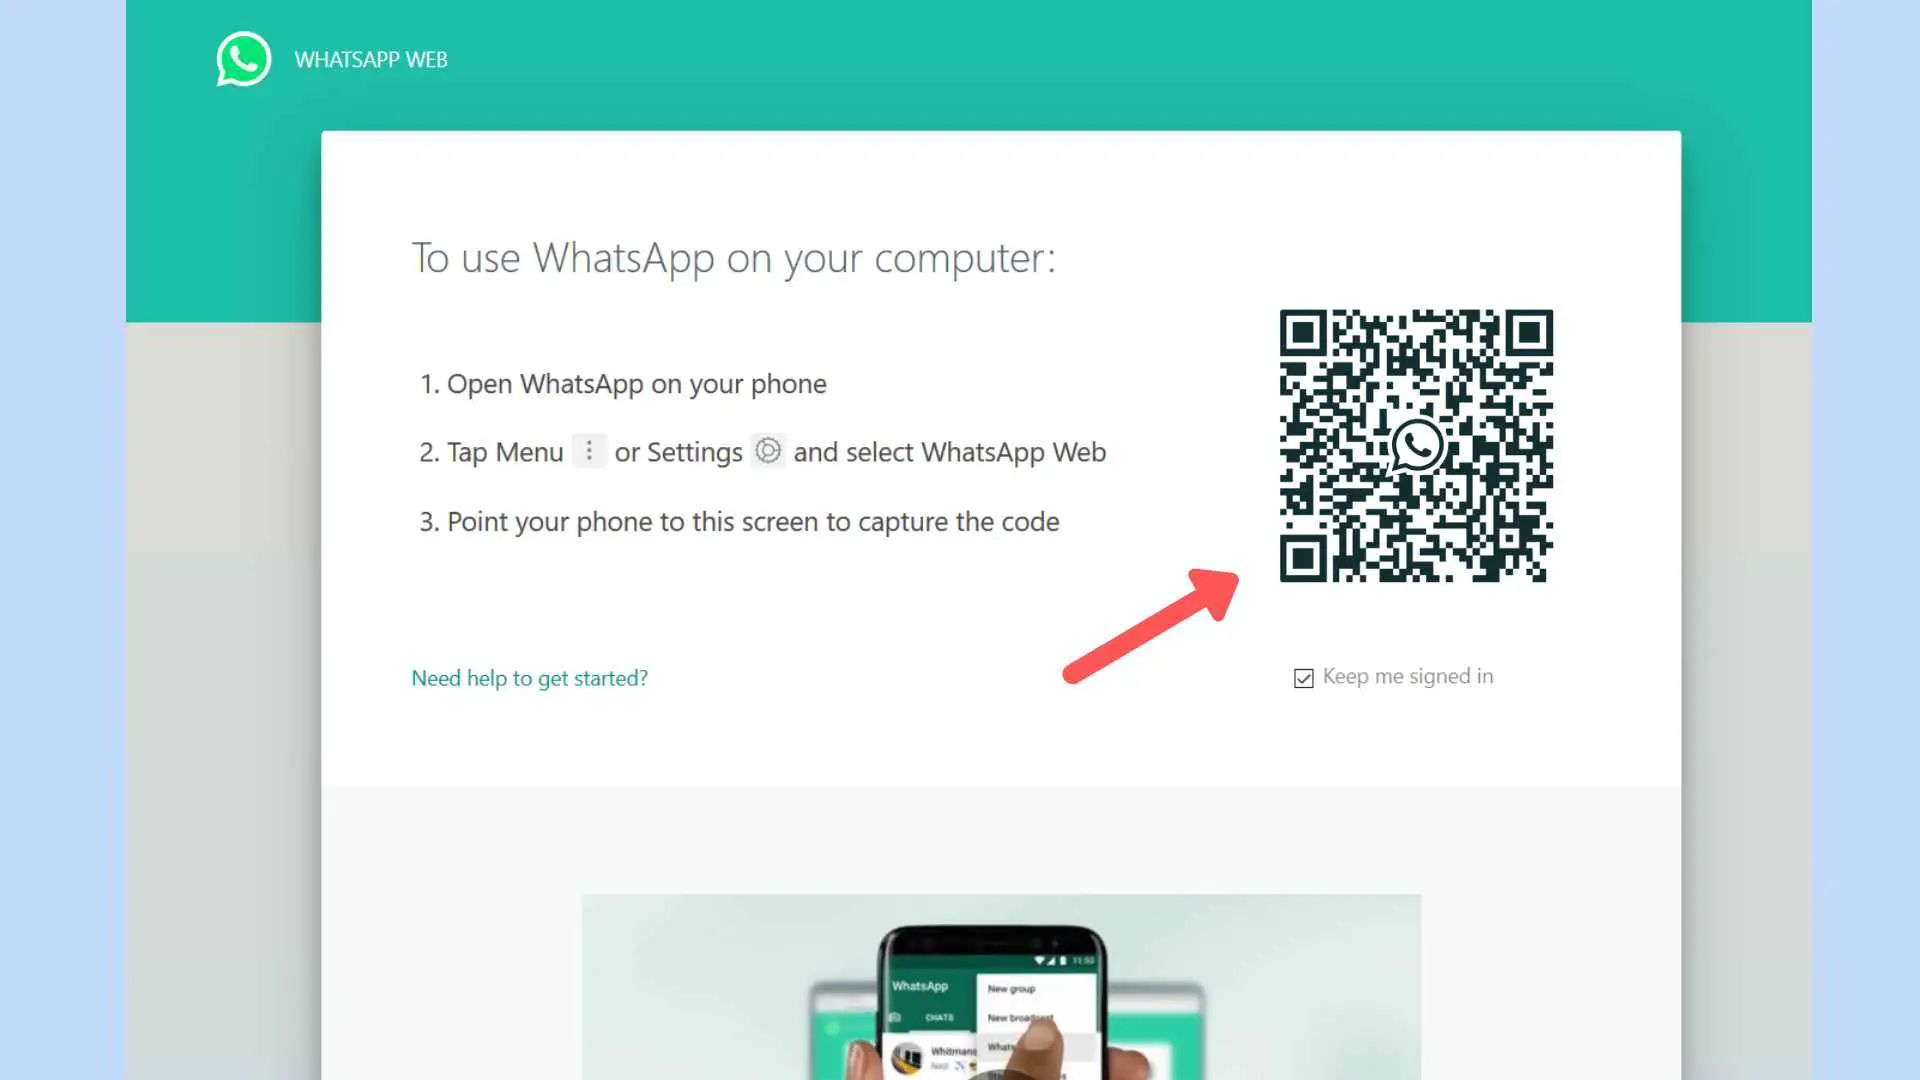 How to Use WhatsApp on Your Computer